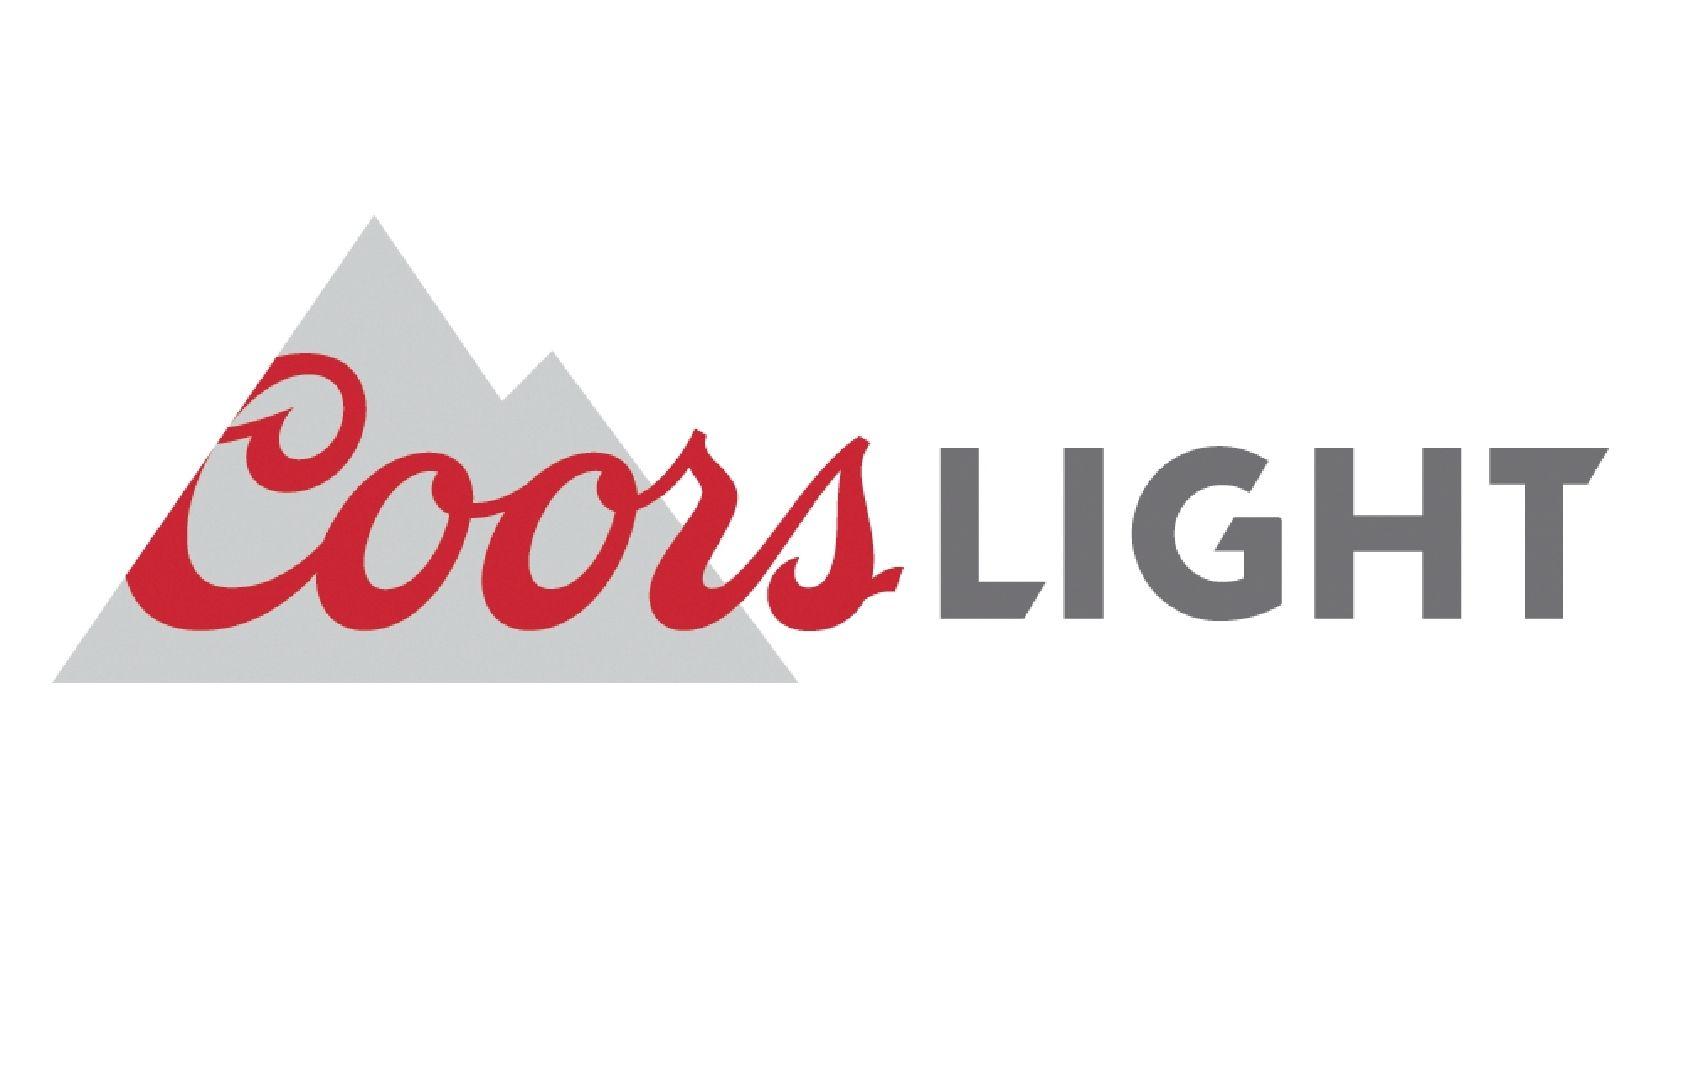 Coors Light Football Logo - Time Inc.'s The Foundry and Coors Light Join Forces to Bring